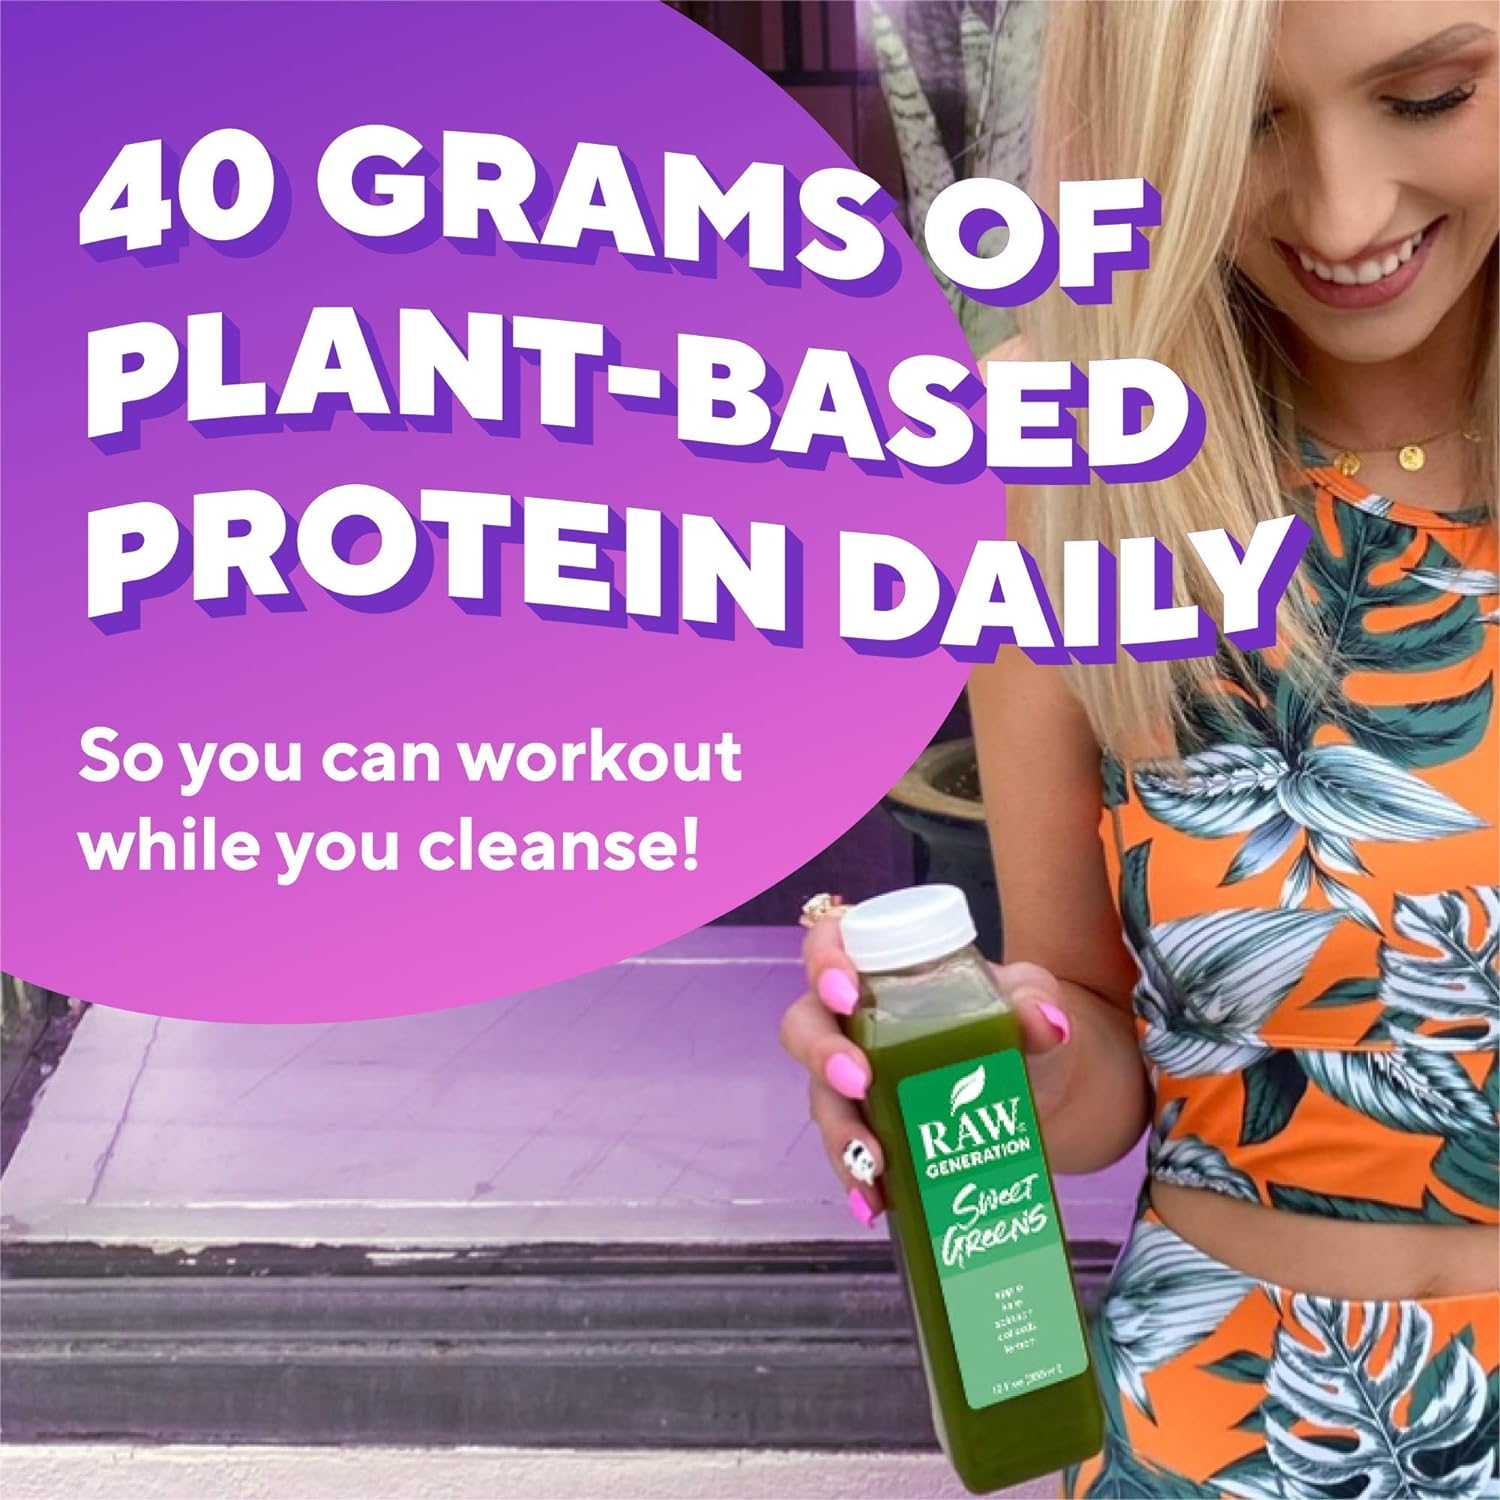 5-Day Protein Cleanse by Raw Generation® – High Protein Juice Cleanse with Dairy and Soy-Free Protein Smoothies/Gets Results Quickly While Energizing Your Workouts/Jumpstart a Healthier Diet